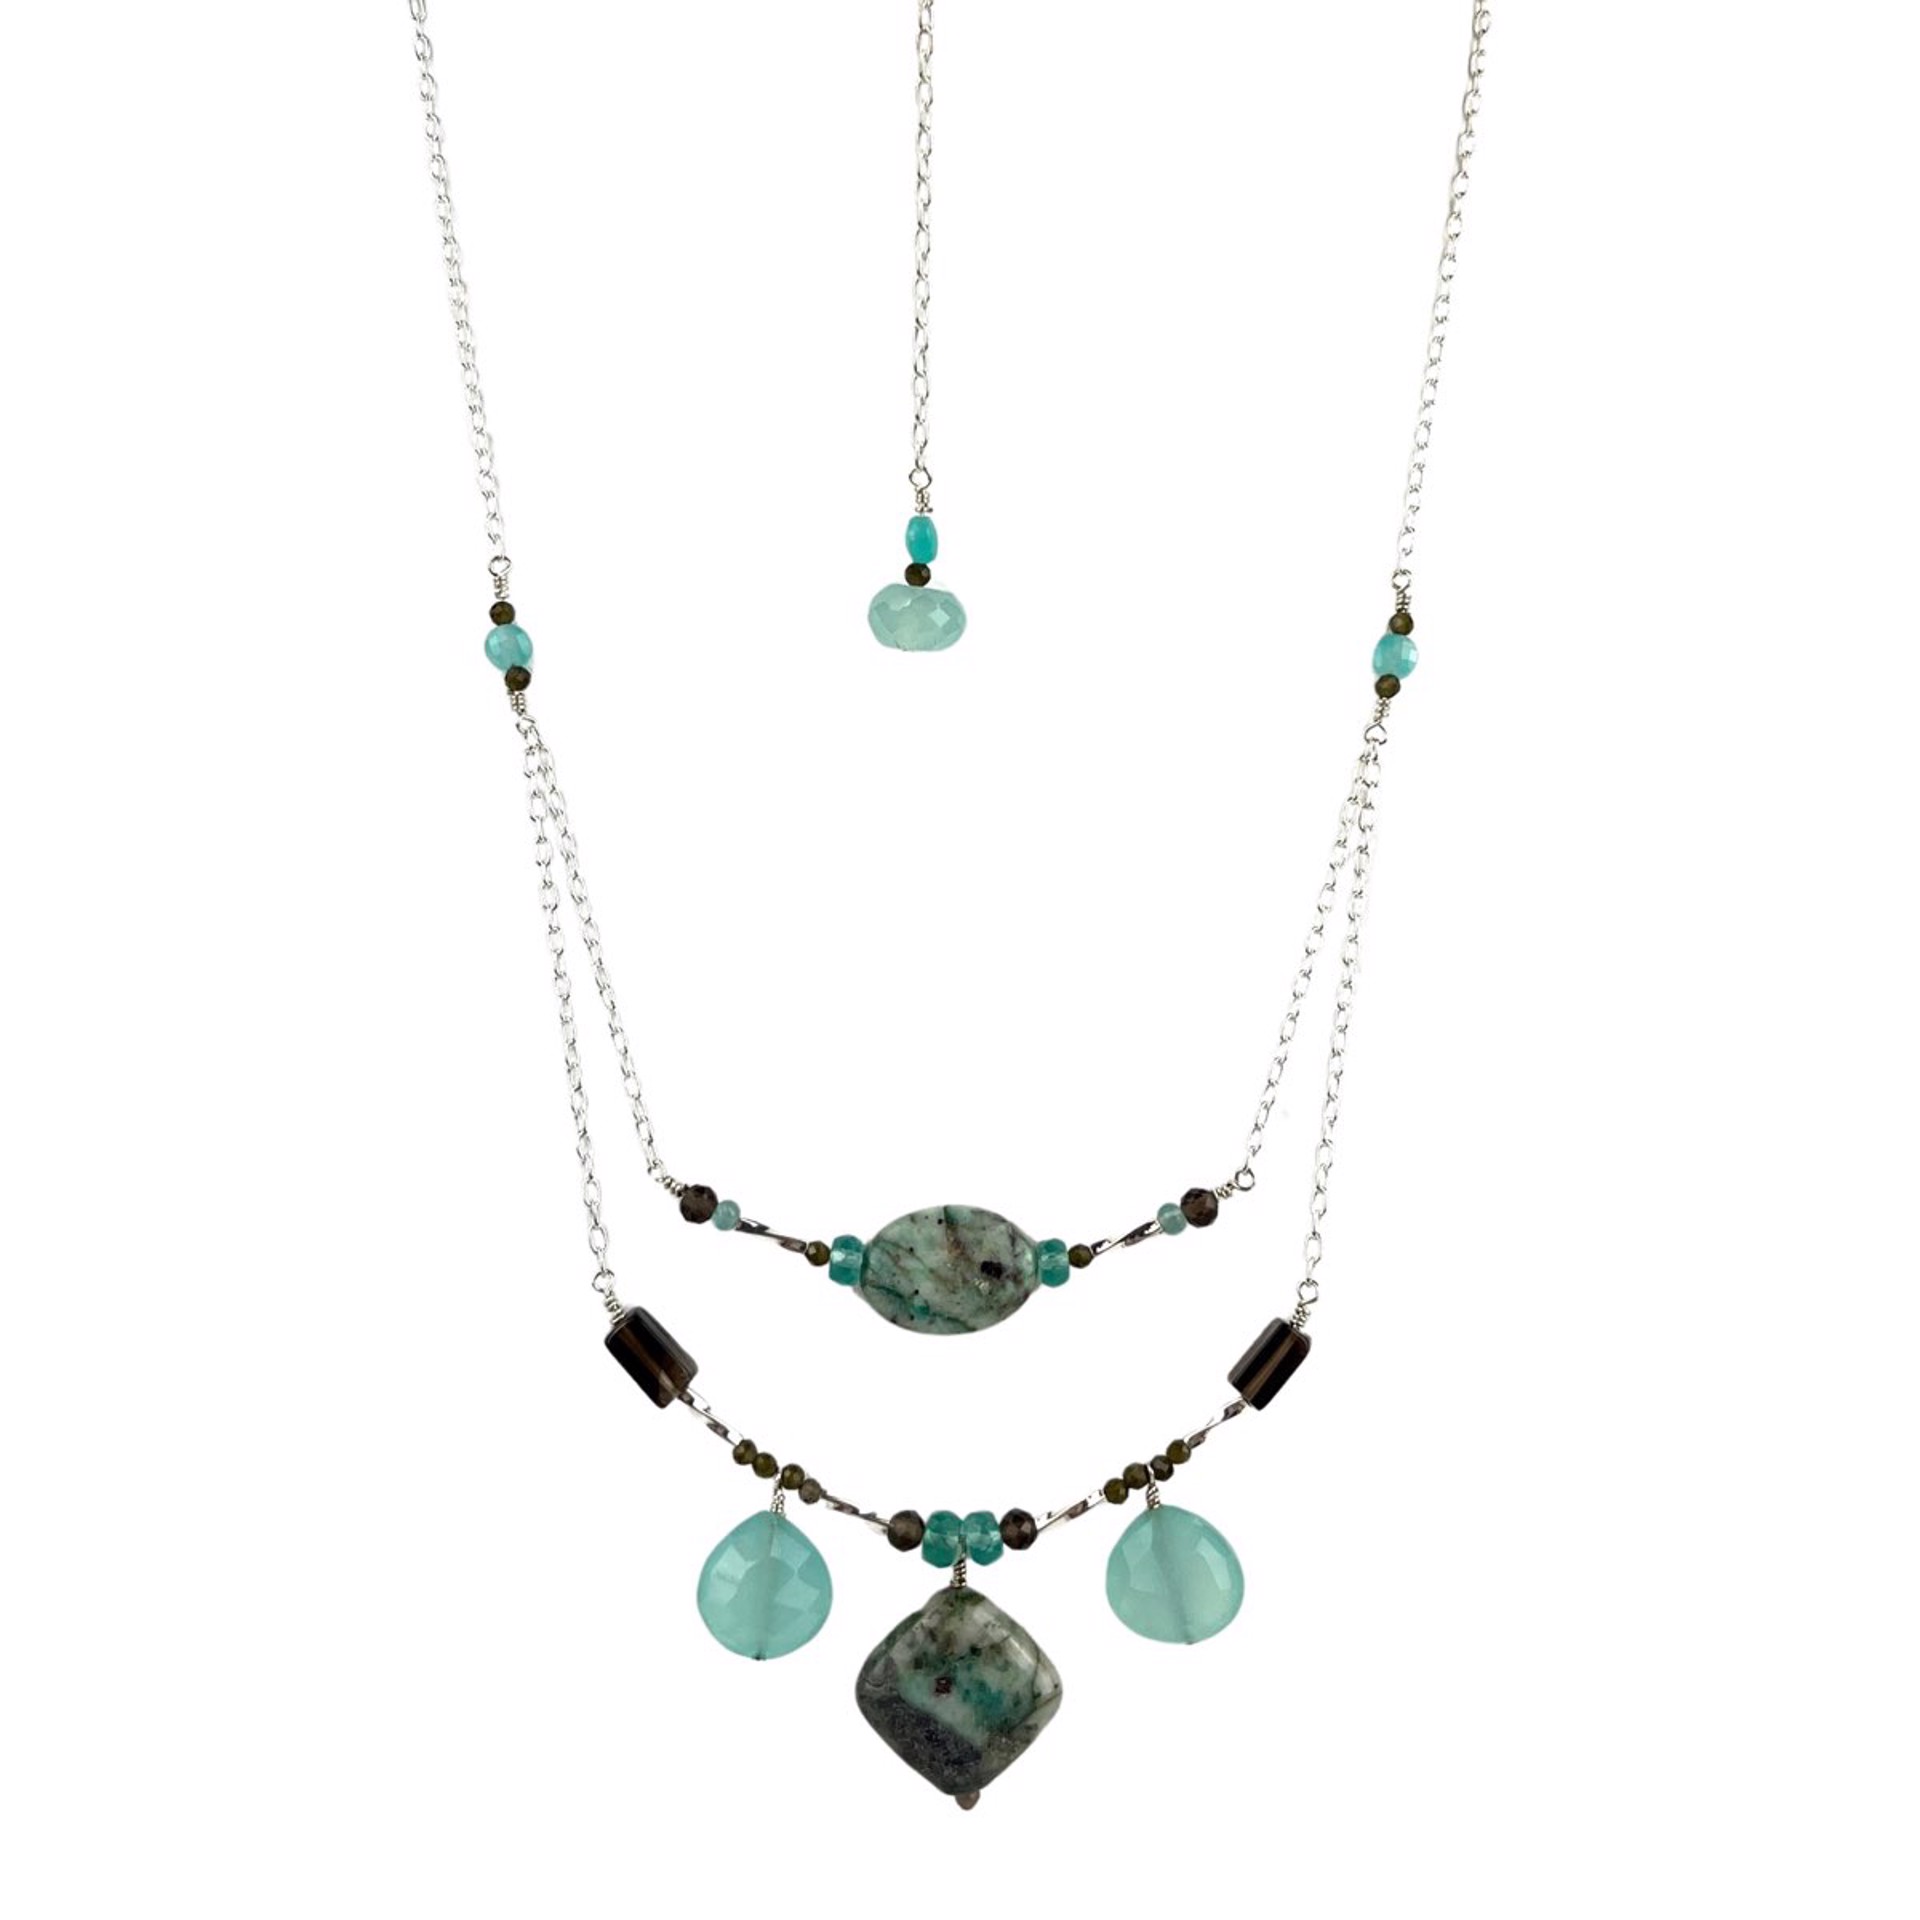 Chrysocolla, Aqua Chalcedony, & Smoky Quartz Double Layer Sterling Silver Necklace with Infinity Pendant by Lisa Kelley